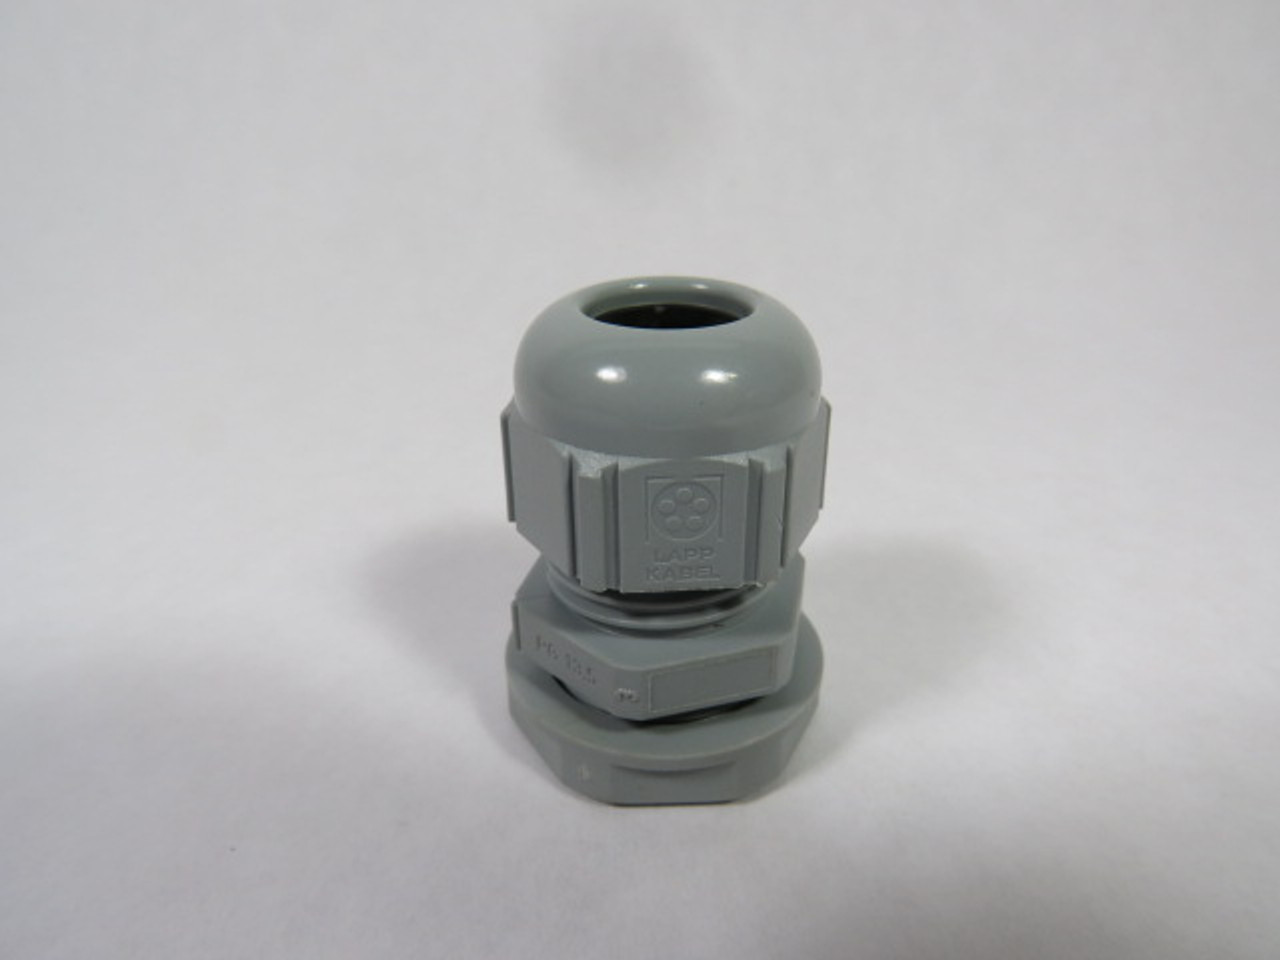 Skintop S1113 Cable Gland PG-13.5 ! NOP !